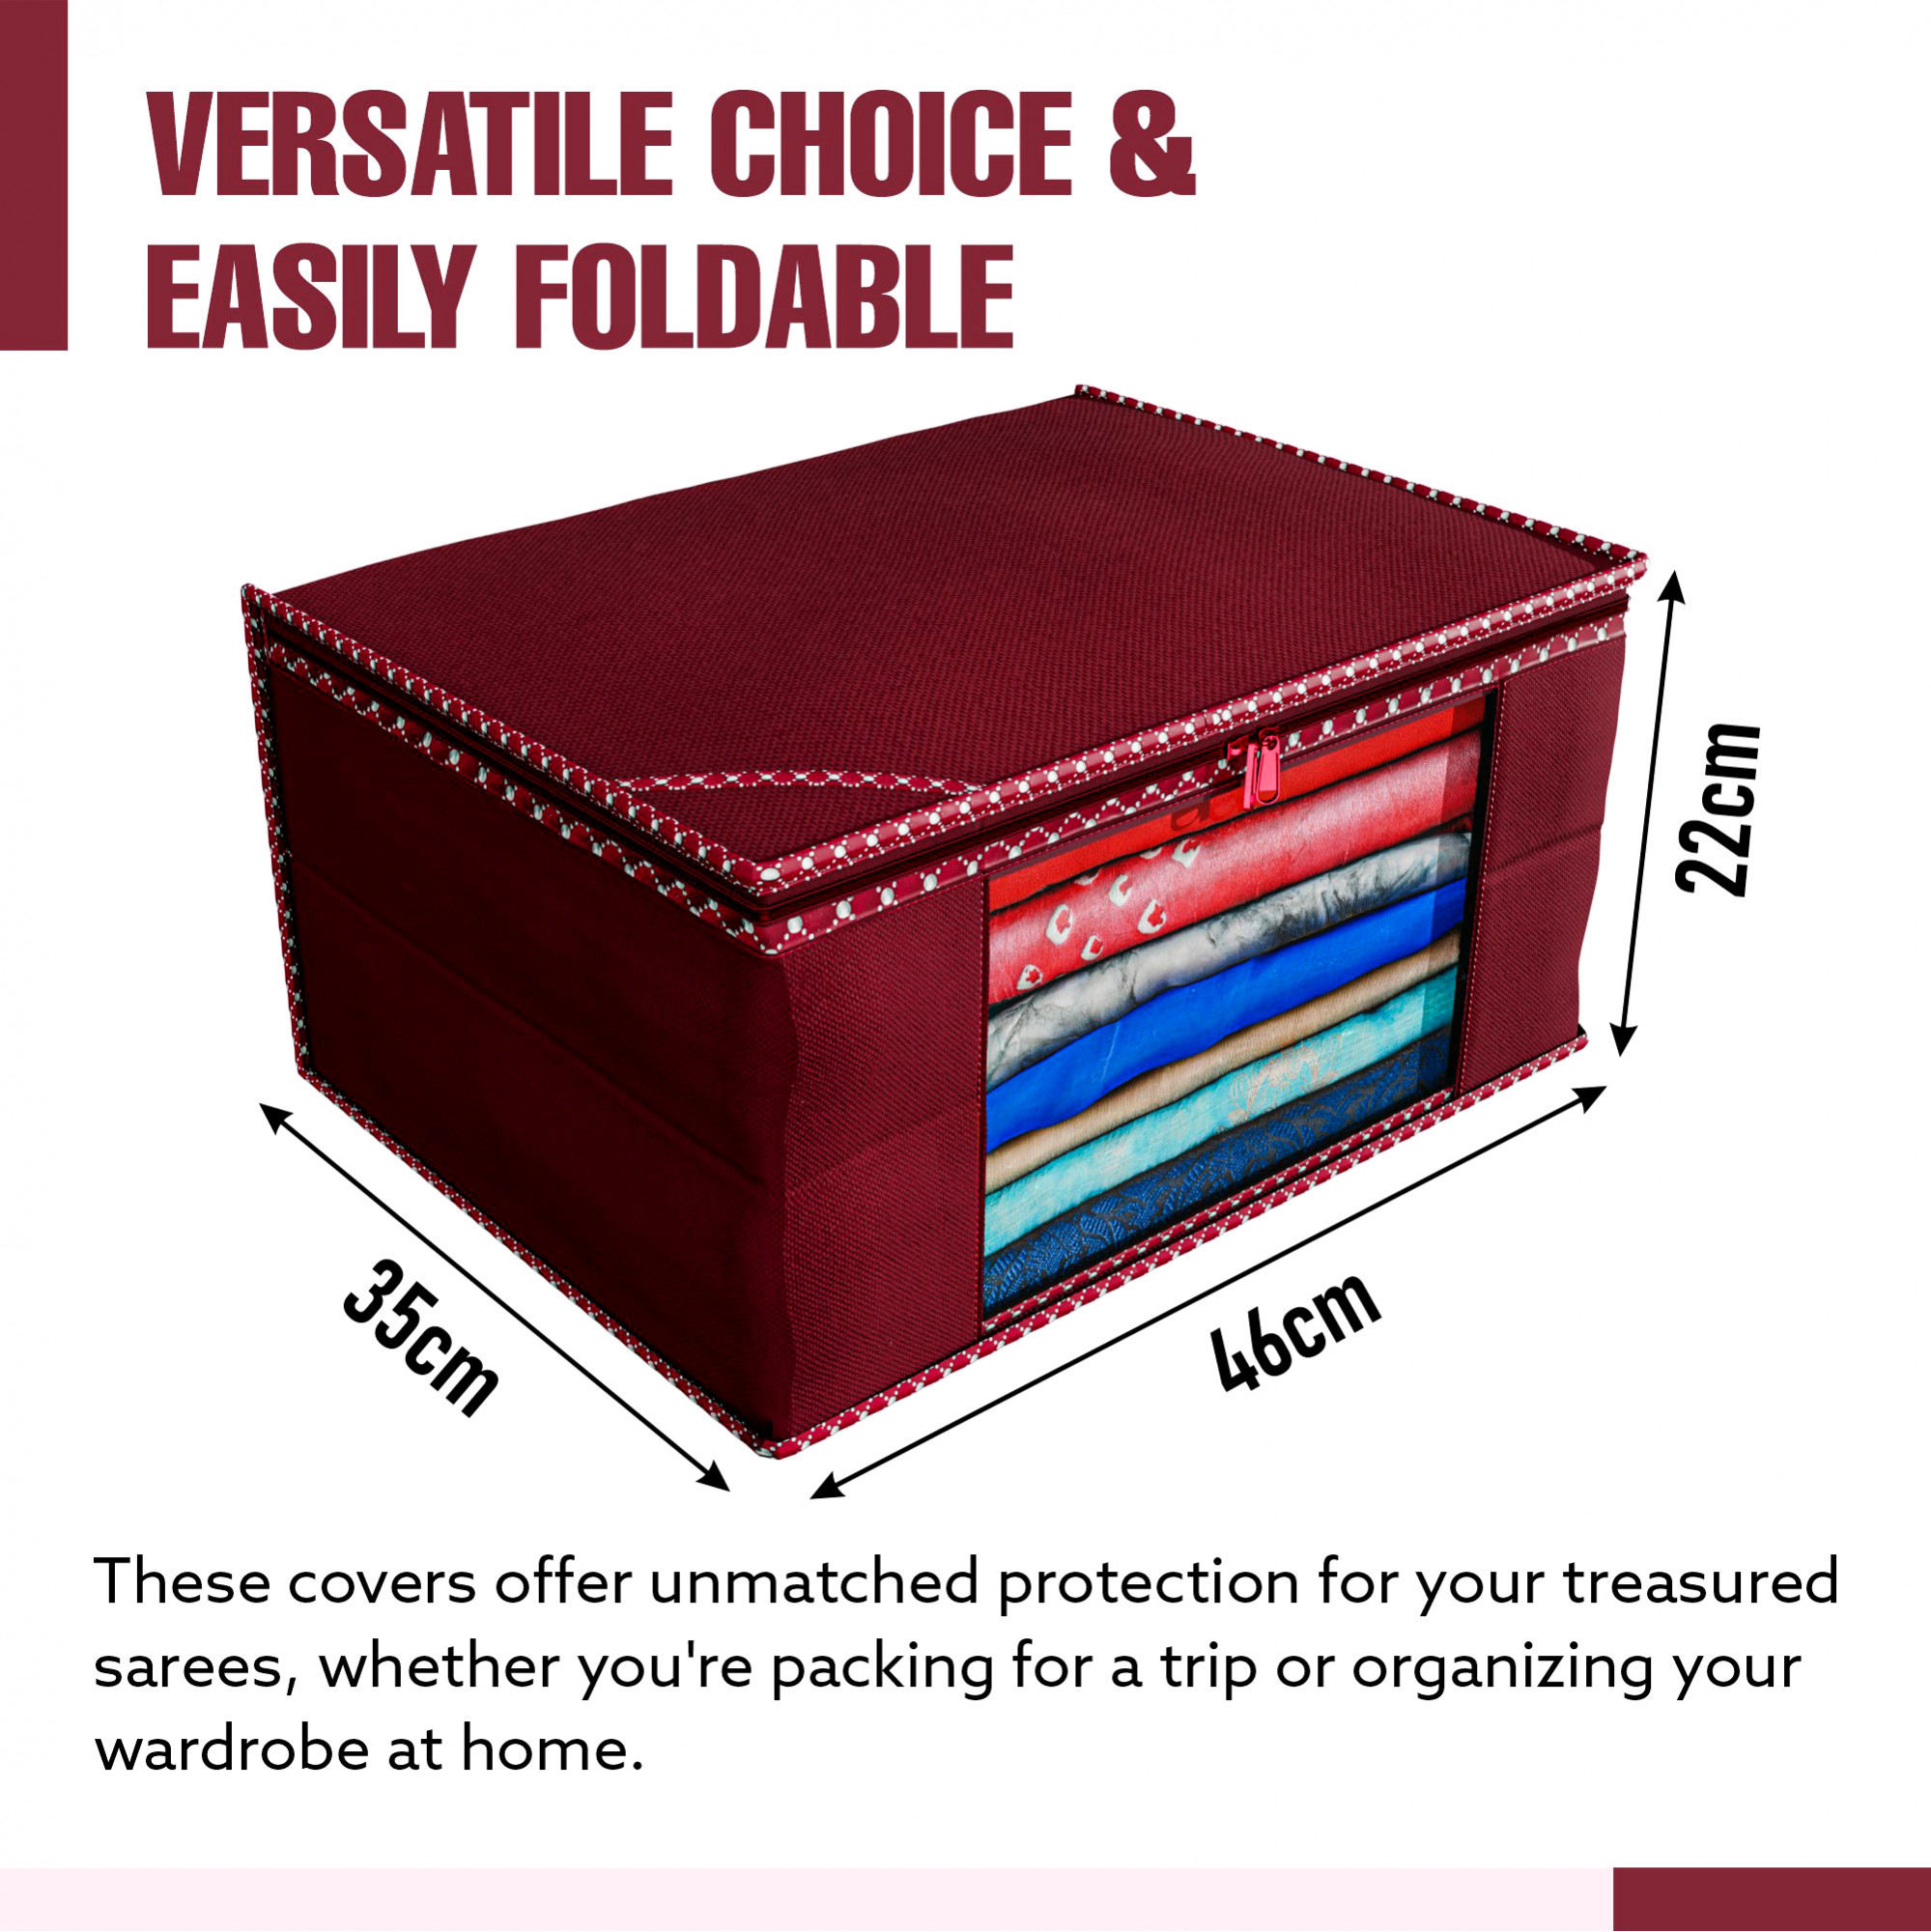 Kuber Industries Non Woven Fabric Saree Cover/Clothes Organizer|Solid Color & Transparent Window|Zipper Closure With Foldable Material|Size 43 x 35 x 22, Pack of 6 (Maroon)